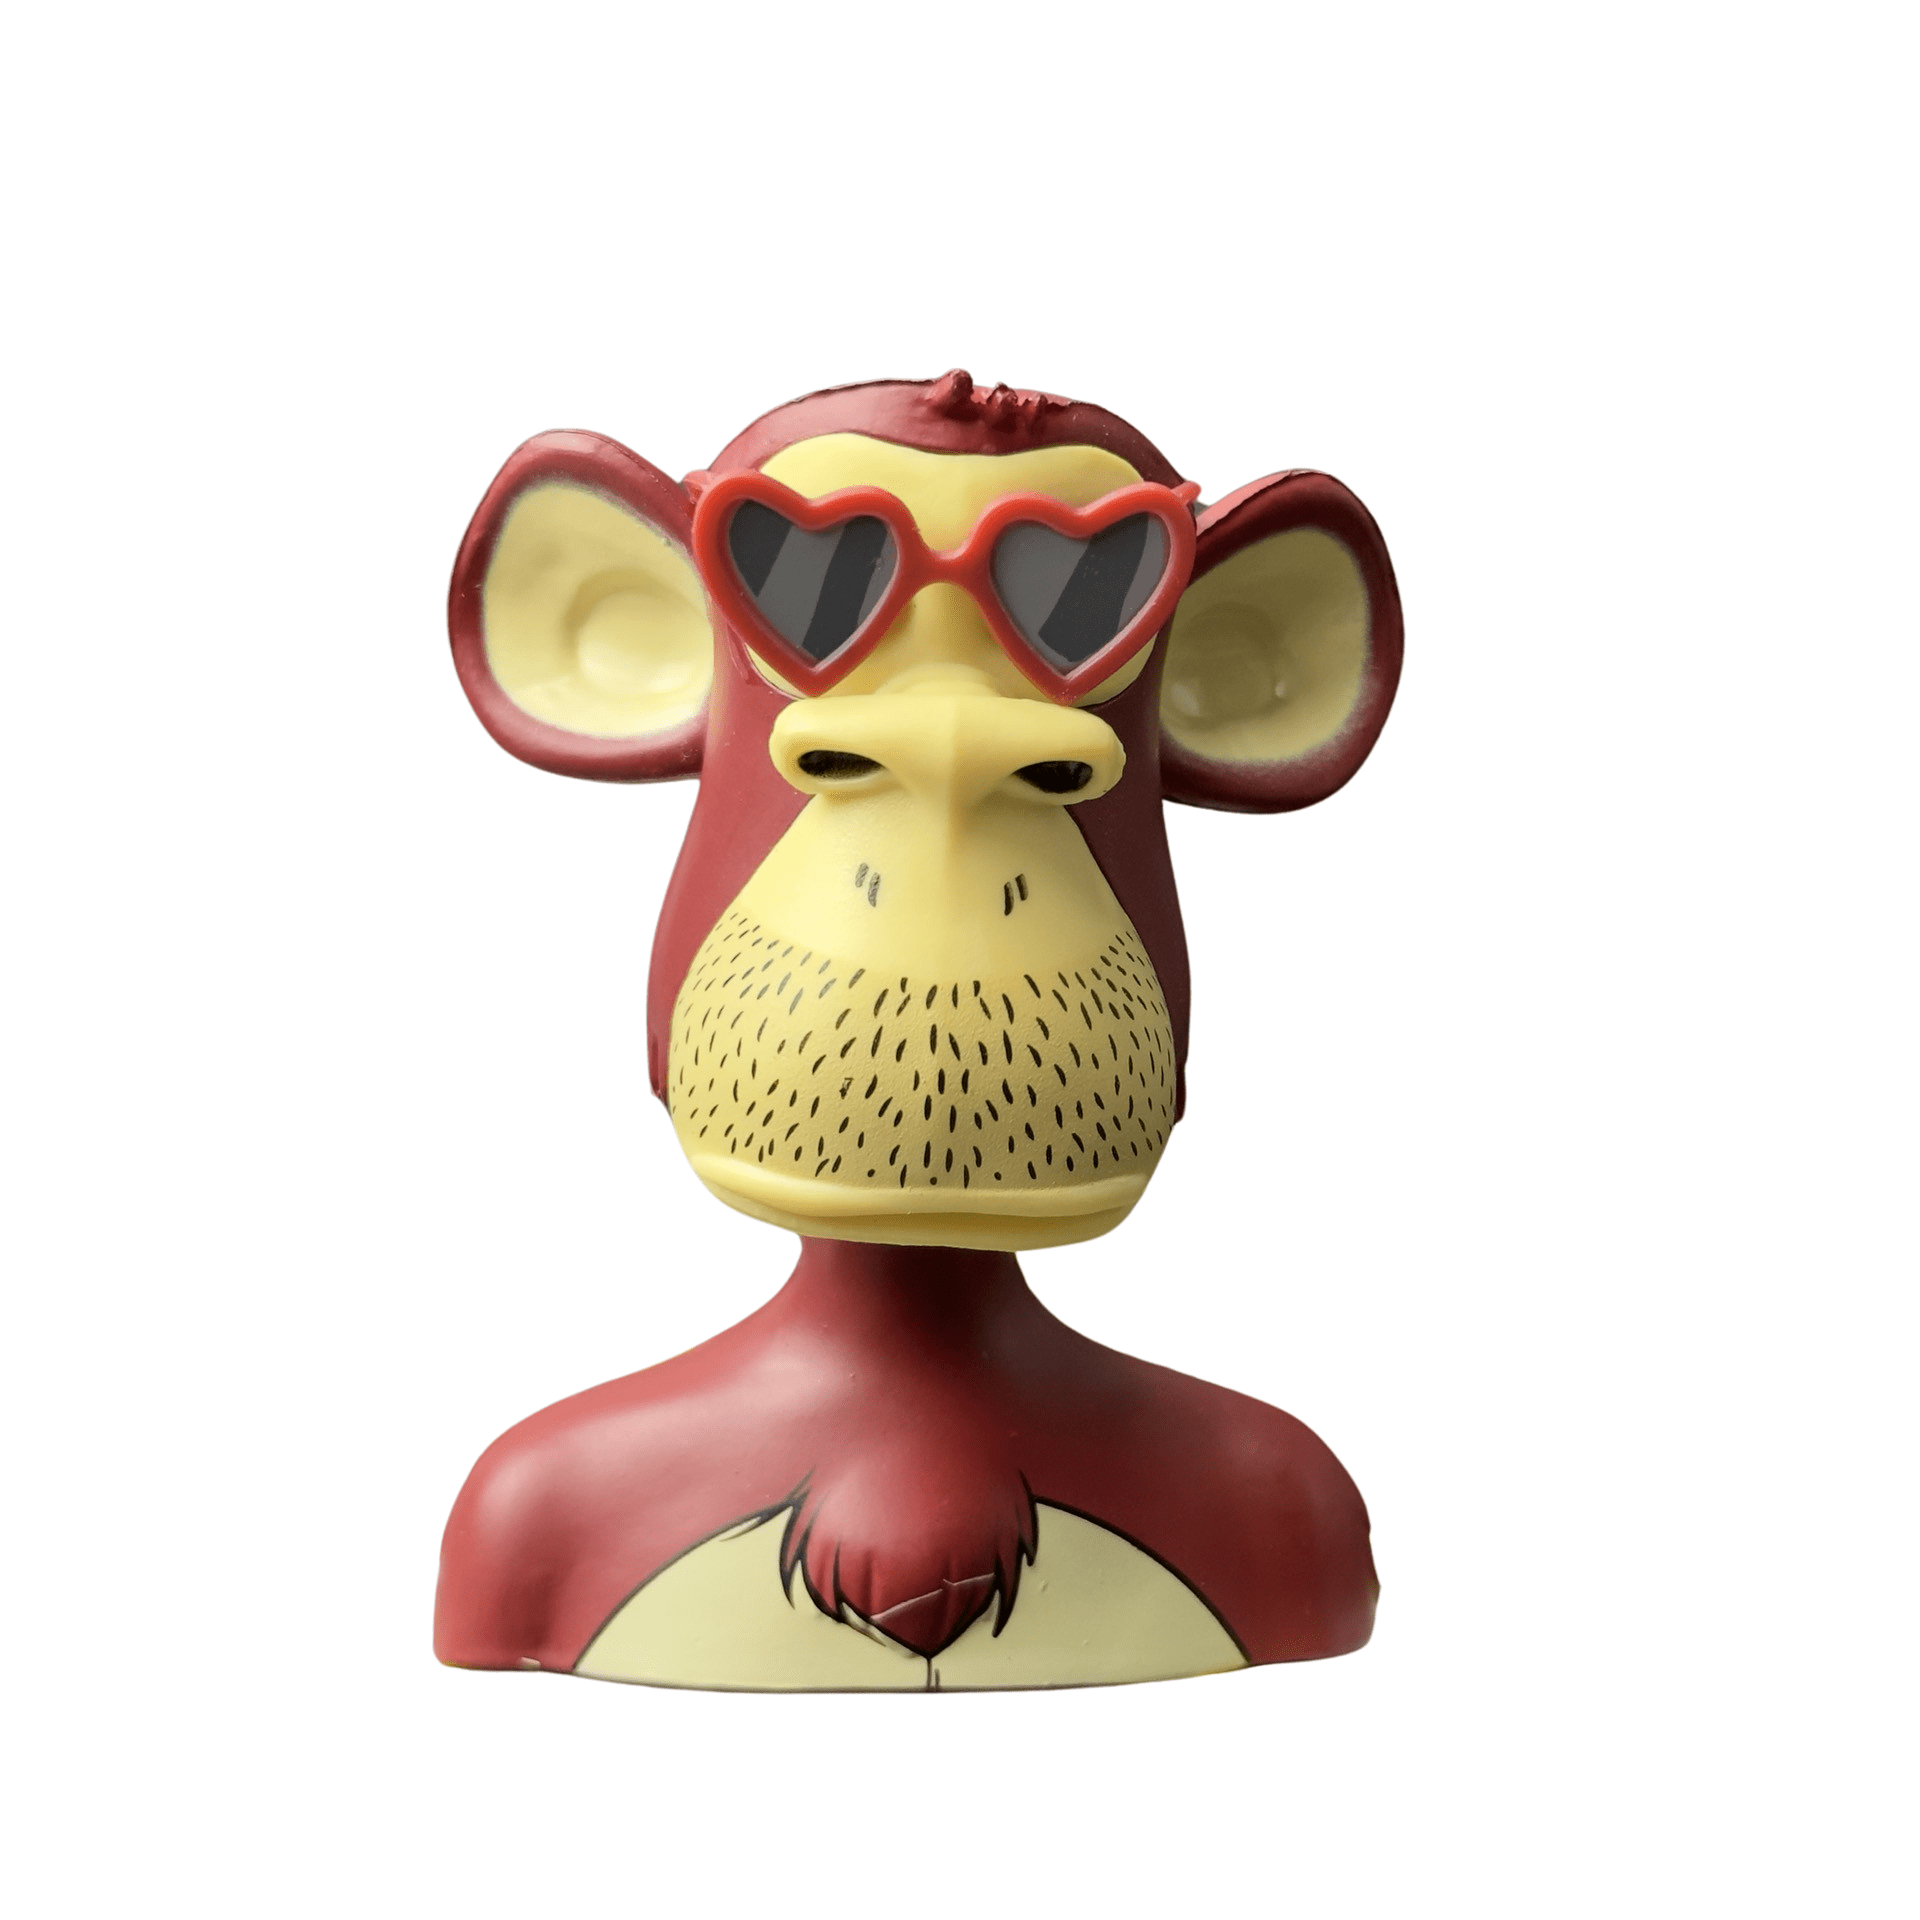 NFTY Figs Series 1 3 Figure By Bored Ape Yacht Club (#5423) 01 | Monkey Paw Mexico